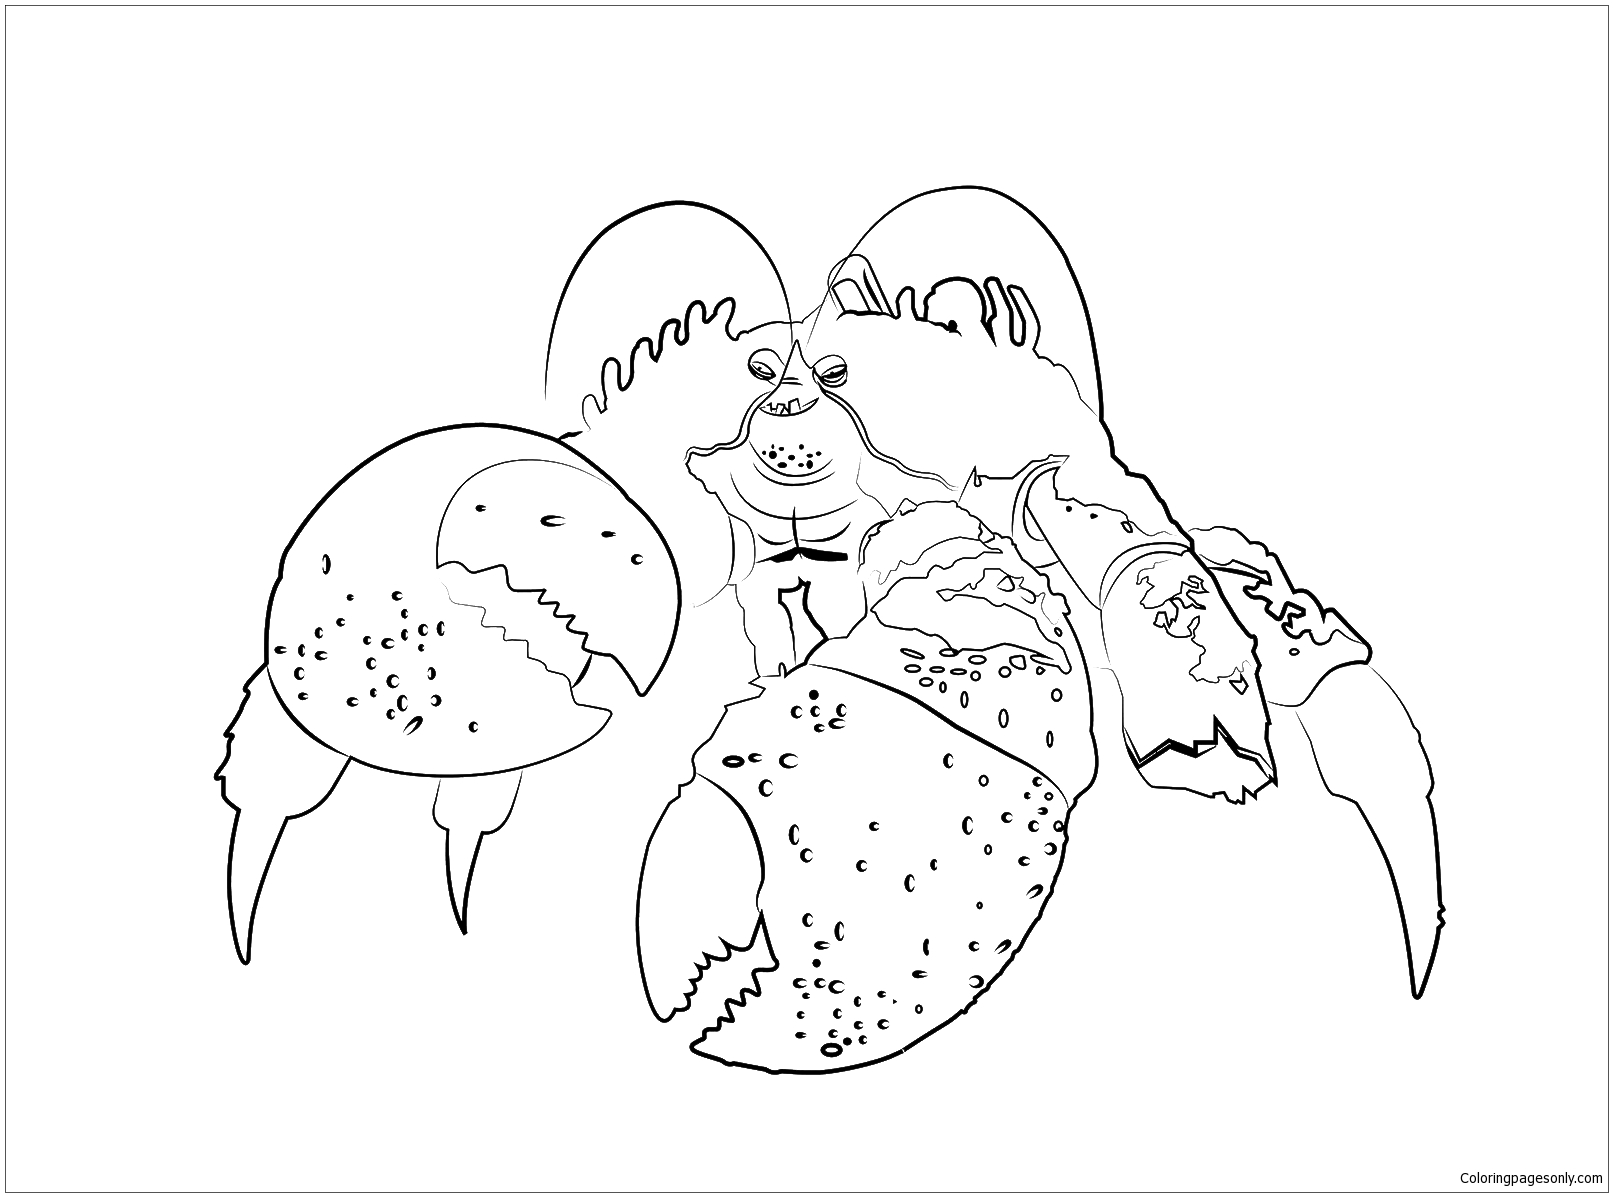 Download Tamatoa A Giant Coconut Crab Coloring Pages Cartoons Coloring Pages Coloring Pages For Kids And Adults